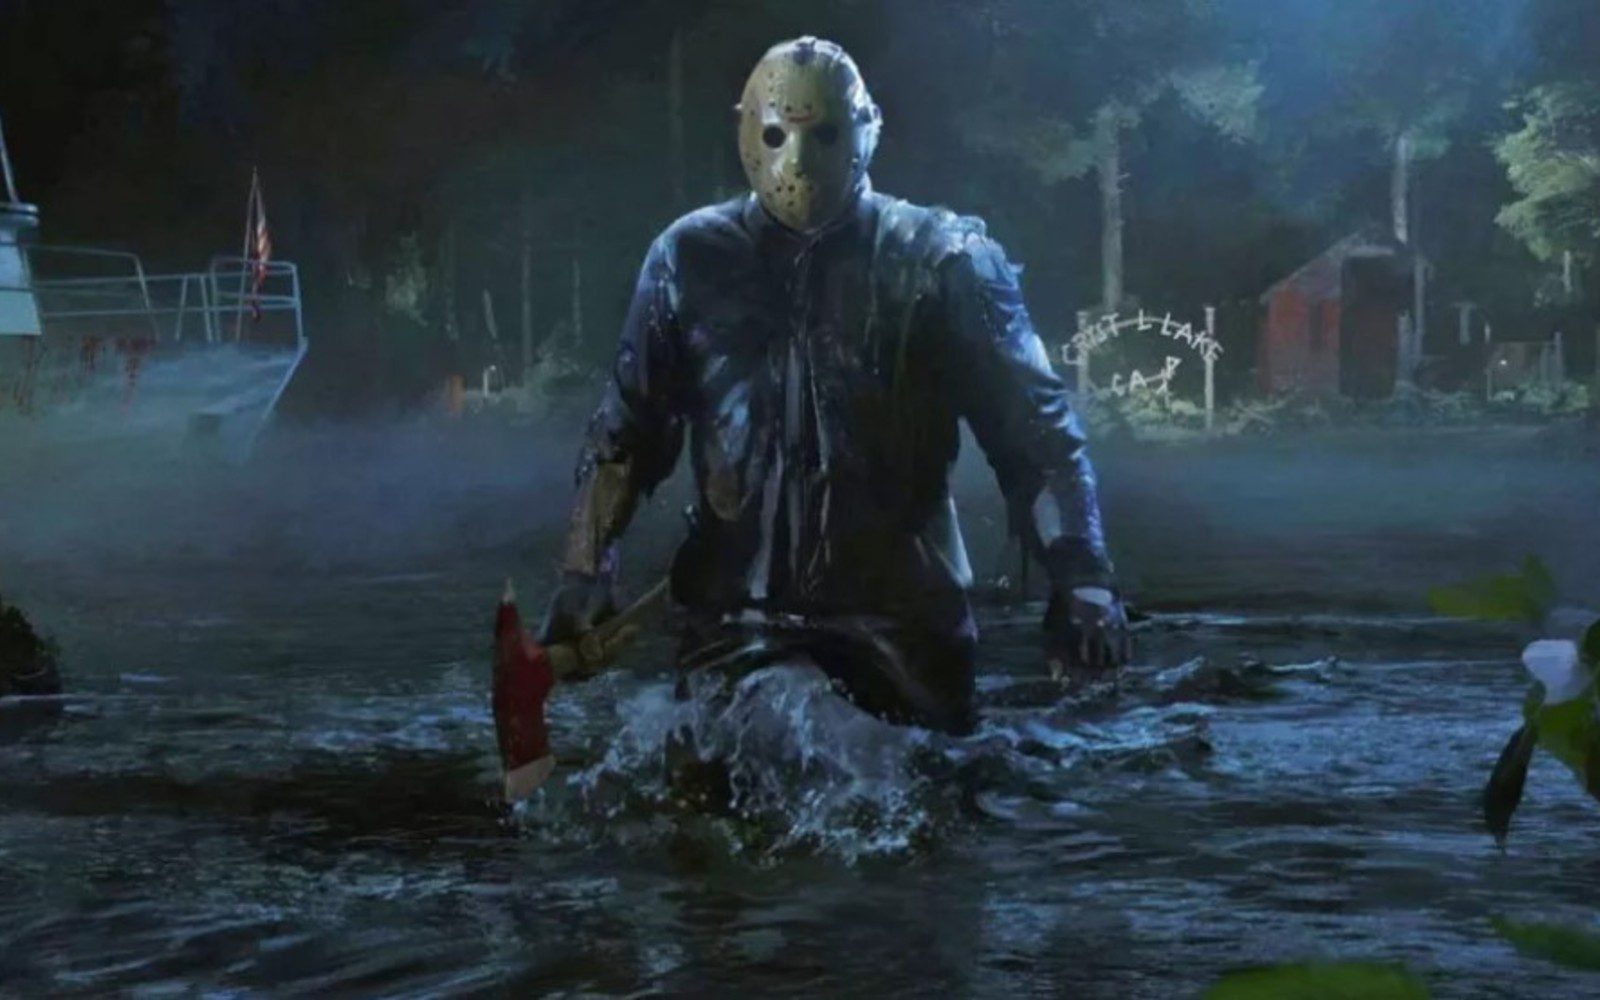 friday the 13th film location